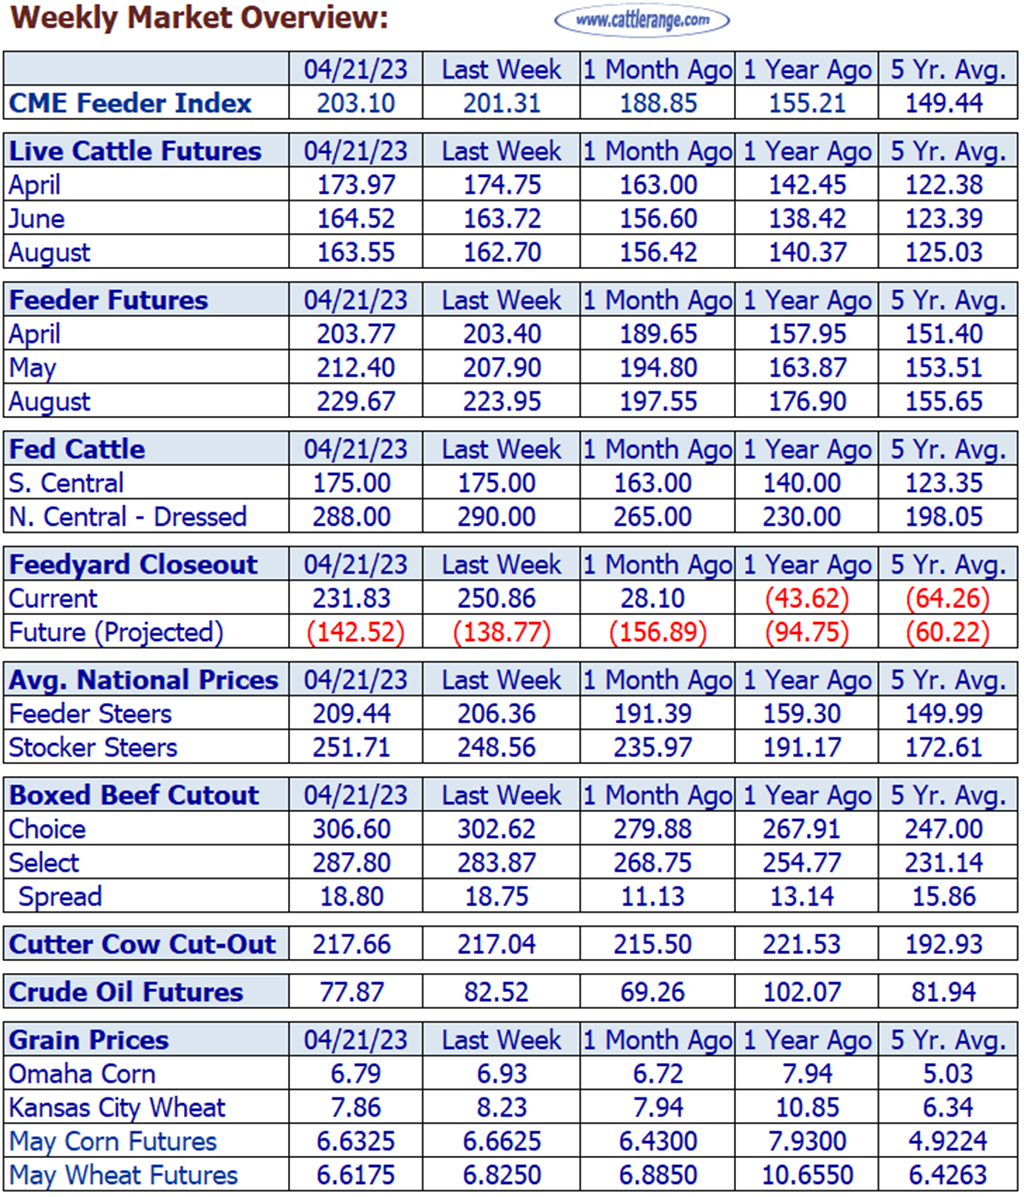 Weekly Cattle Market Overview for Week Ending 4/21/23